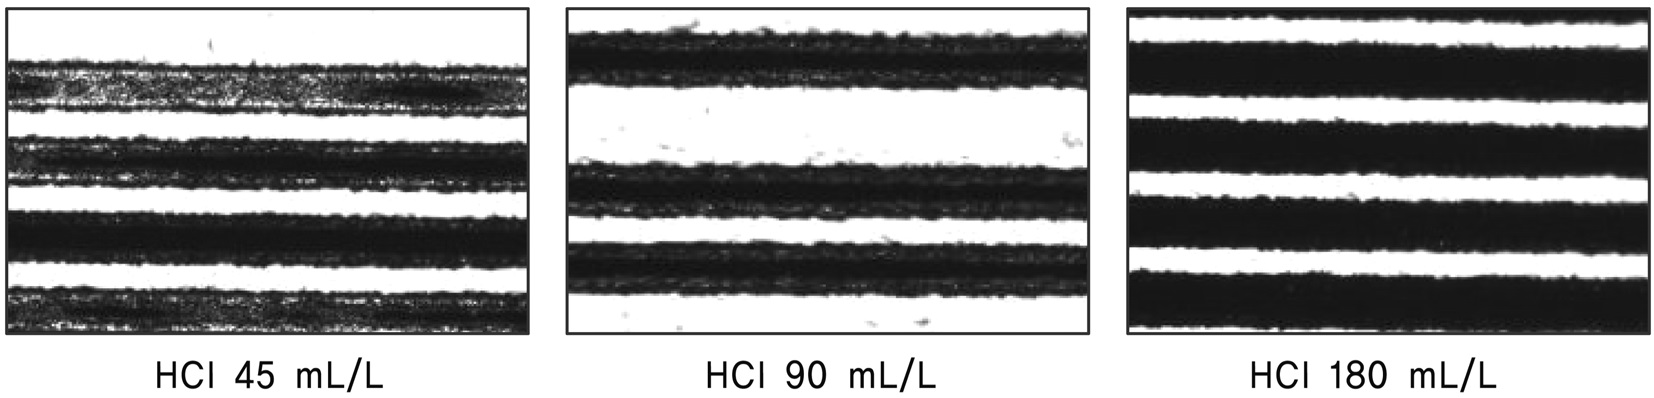 Effect of the HCl concentration on the running blots between patterns observed by optical microscope (×100). The pitch of the samples is 105 μm.